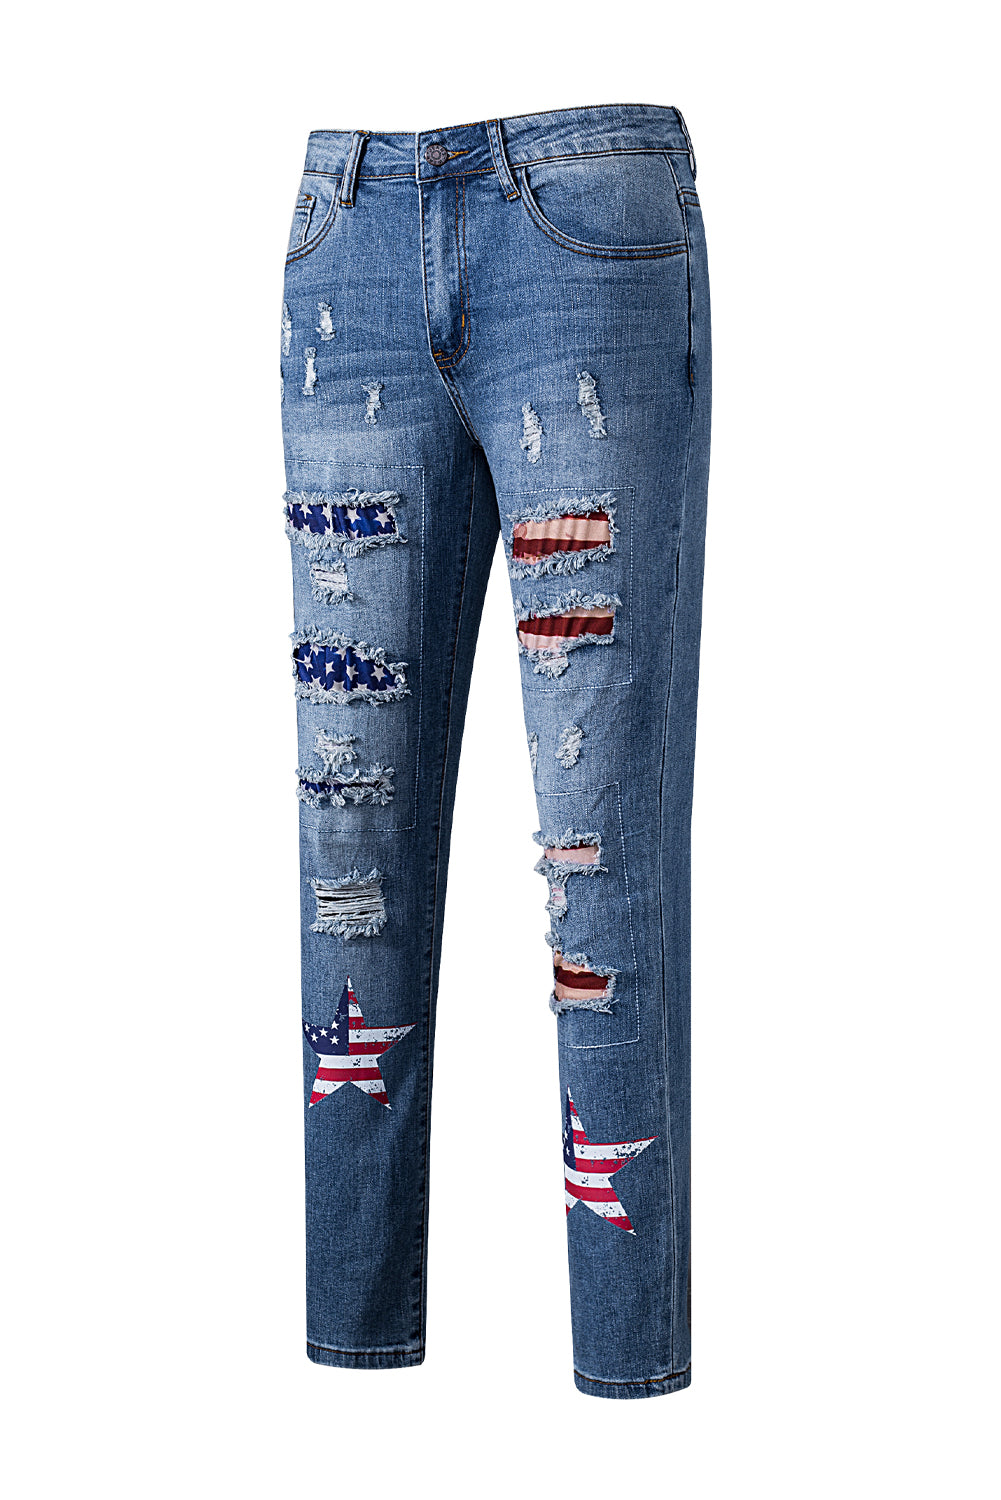 Sky Blue American Flag Patched Distressed Jeans Graphic Pants JT's Designer Fashion